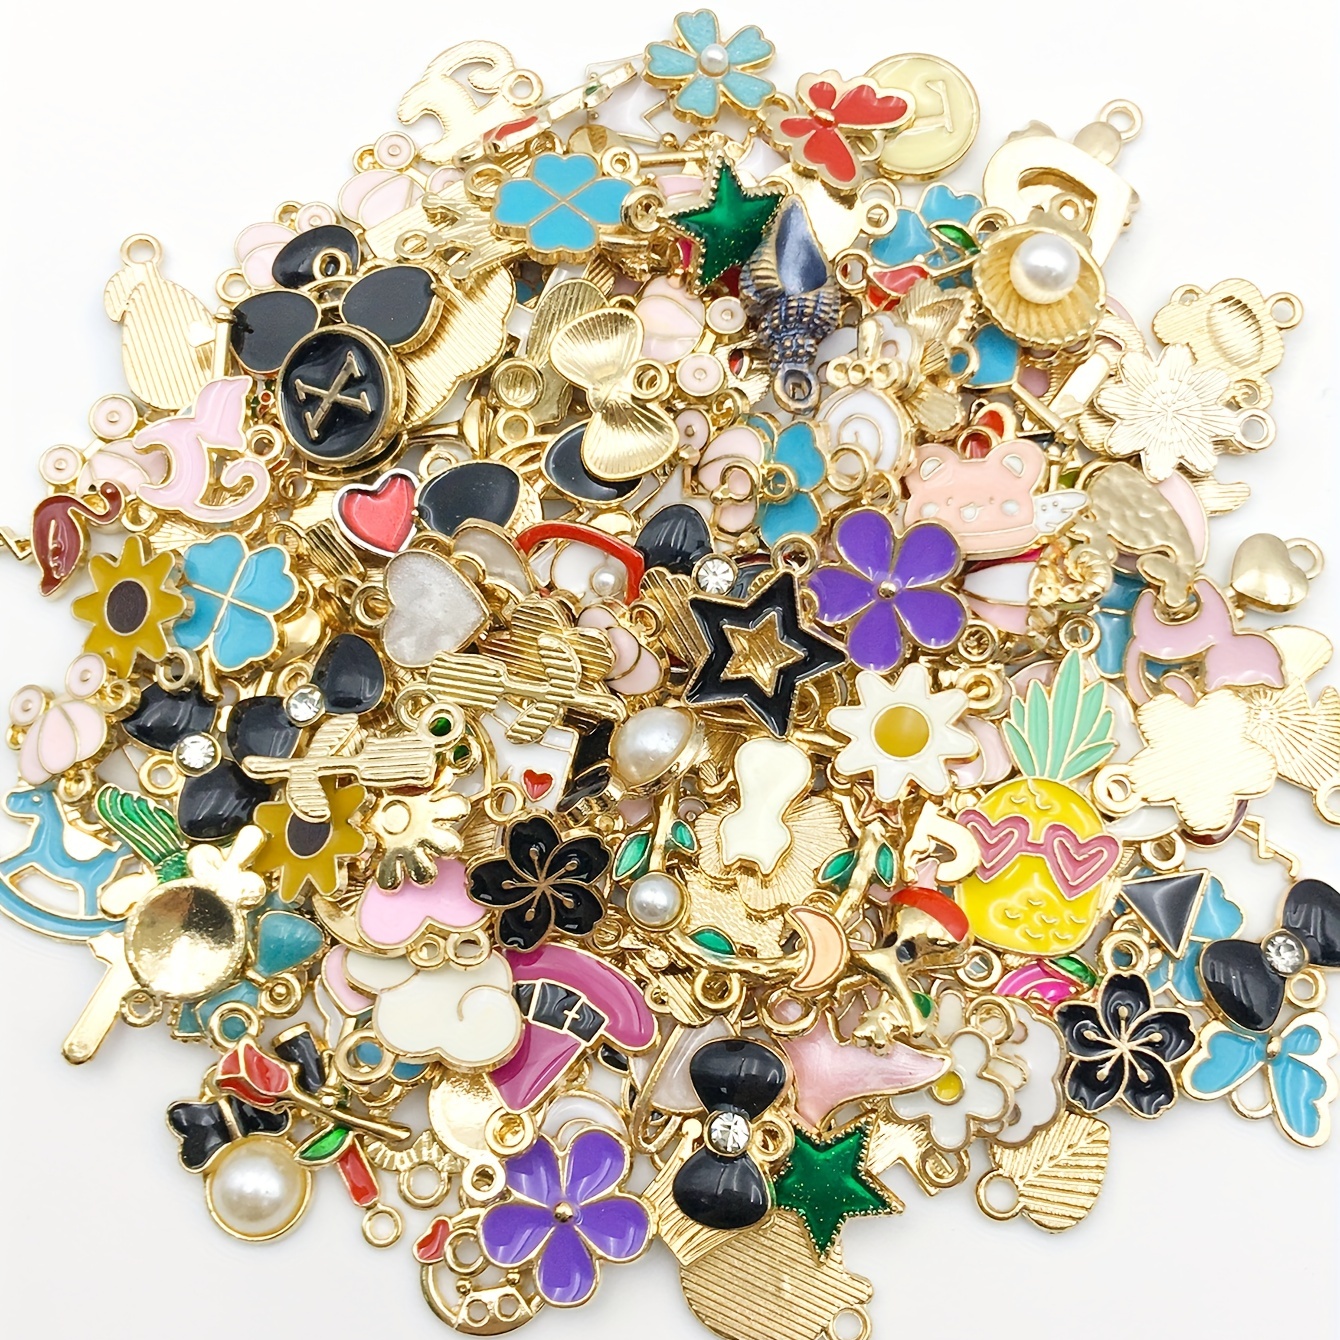 100PCS Mix Enamel Gold Plated Charms Pendant for Jewelry 